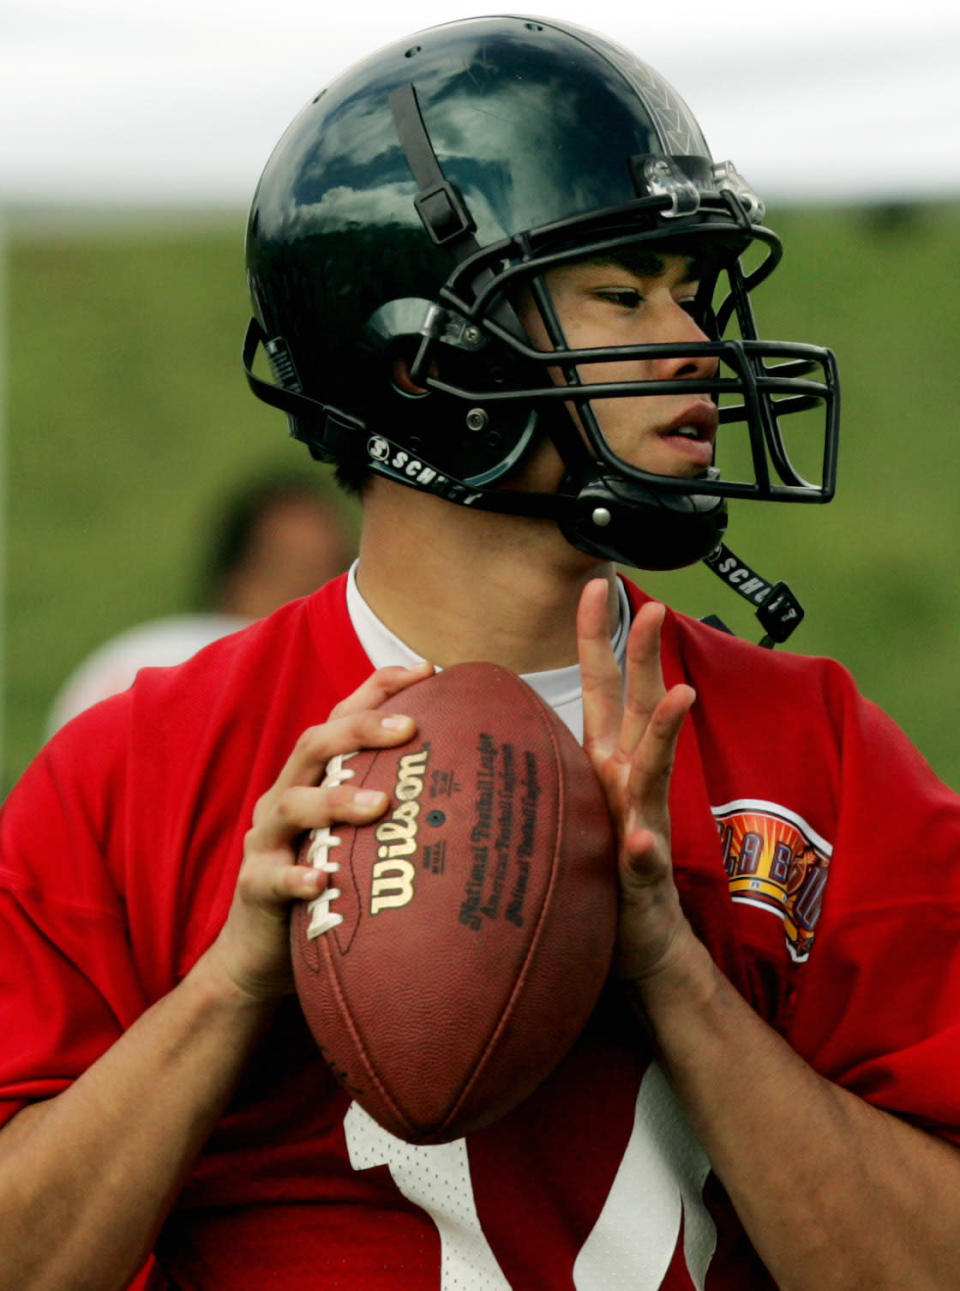 West team quarterback Timmy Chang of Hawaii is shown during practice for the Hula Bowl Thursday, Jan. 20, 2005, in Wailuku on the island of Maui in Hawaii. Teams of college standouts from East and West meet in the Hula Bowl Saturday, Jan. 22. (AP Photo/Reed Saxon)